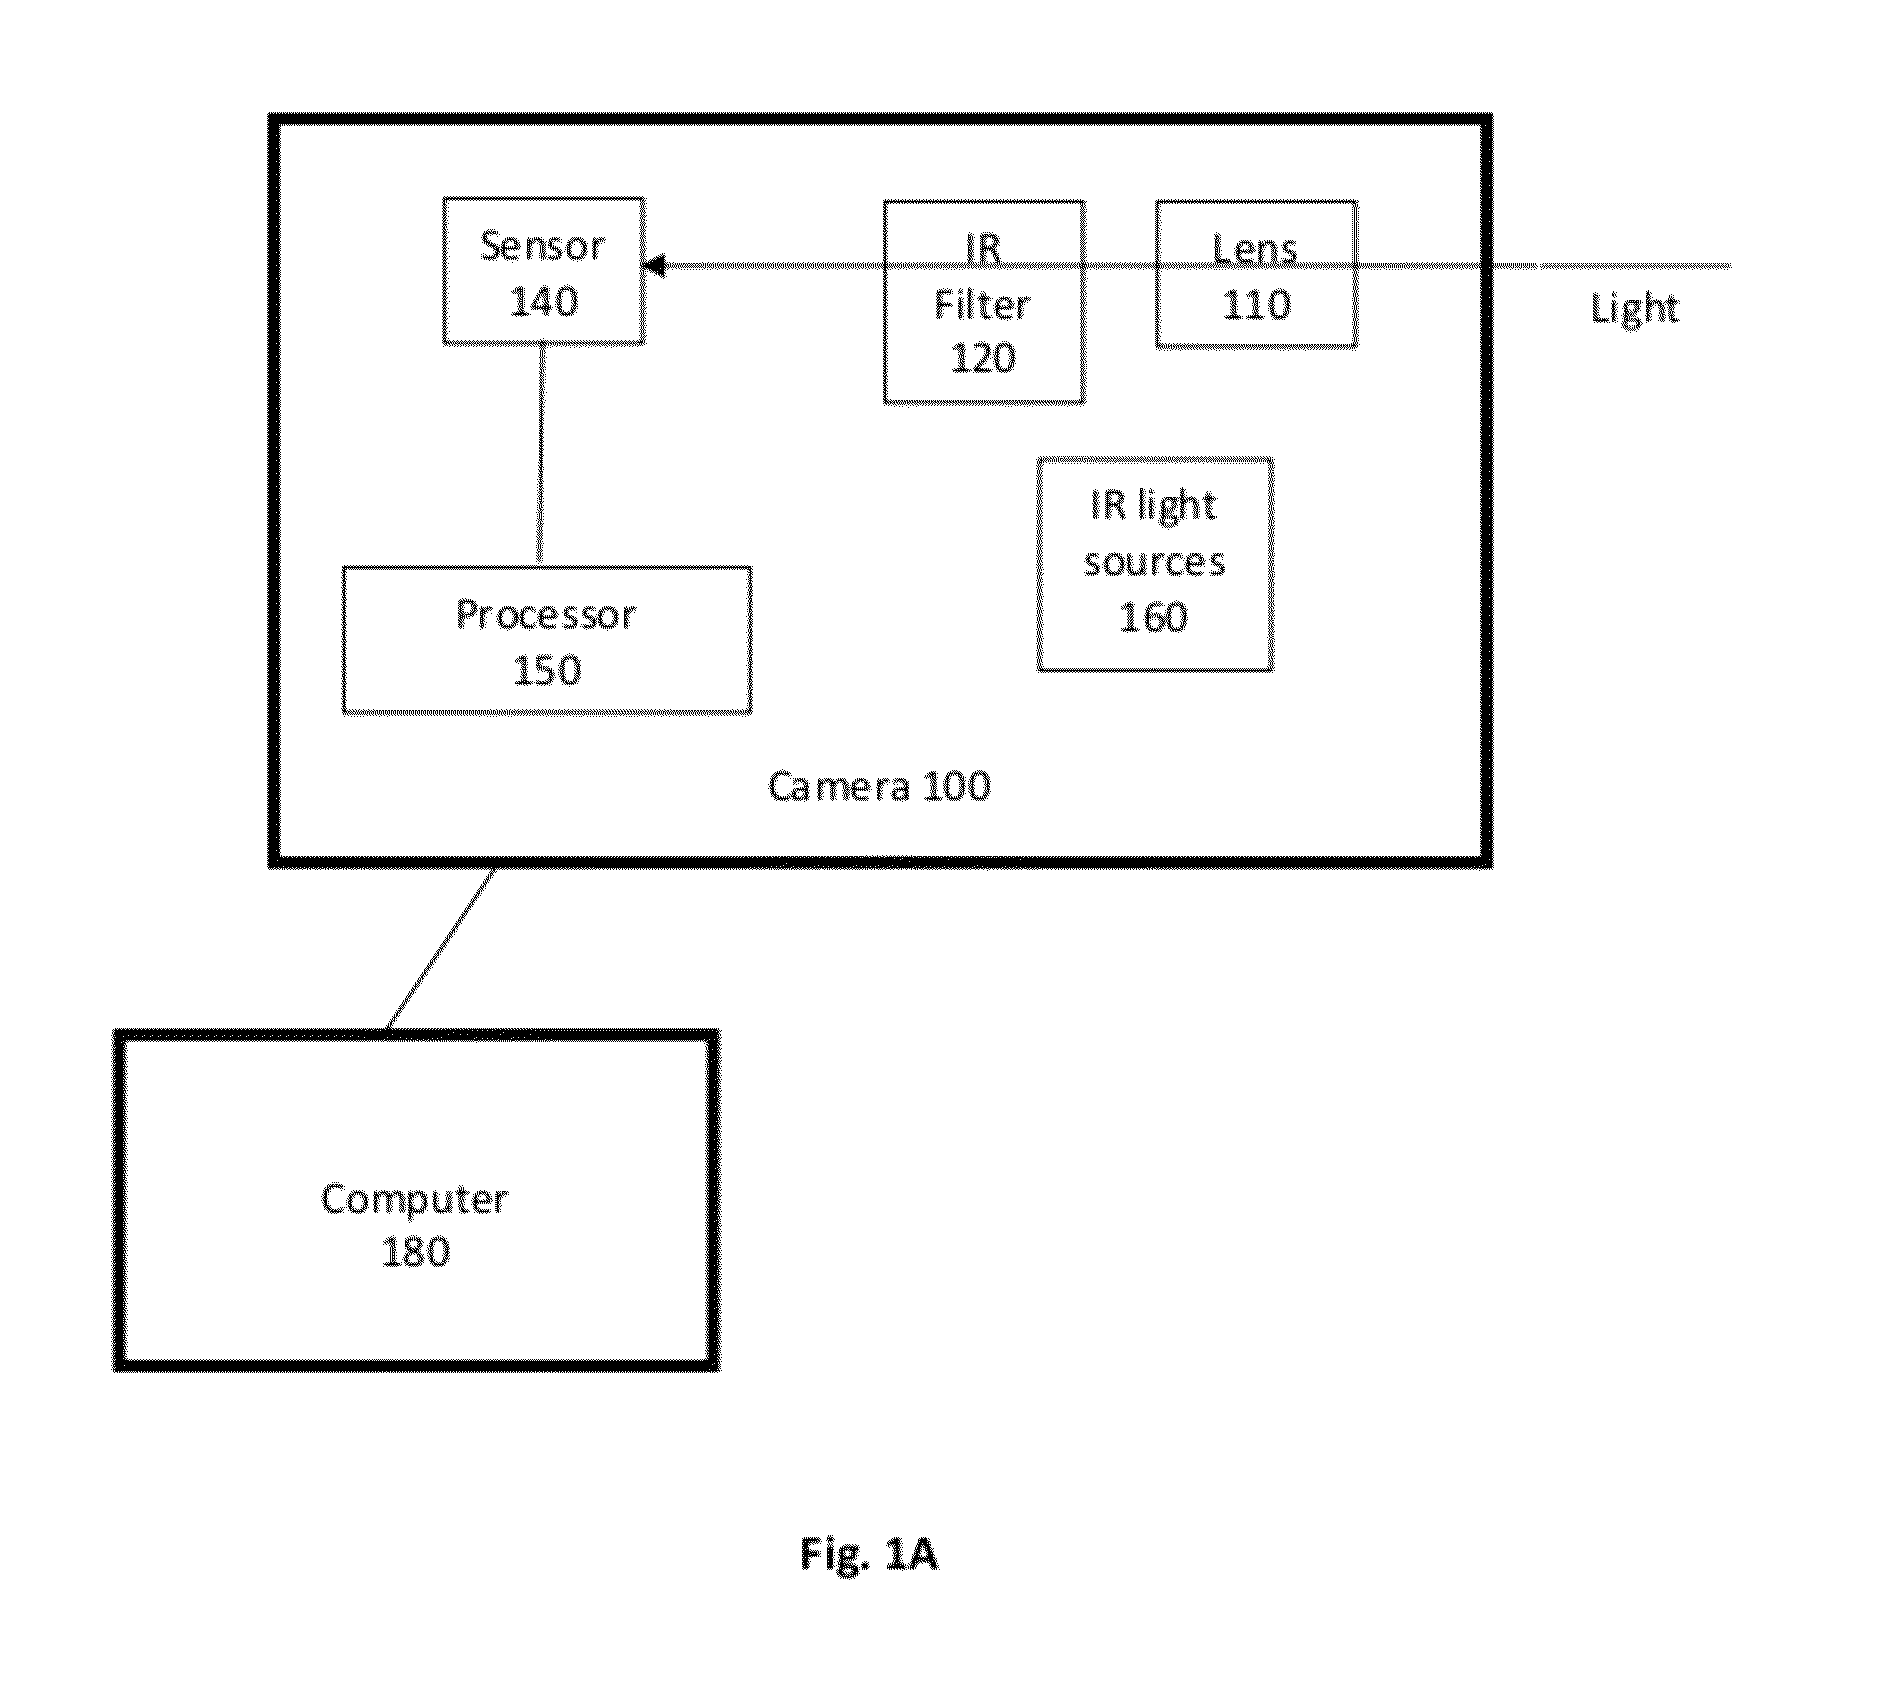 Optimized movable IR filter in cameras